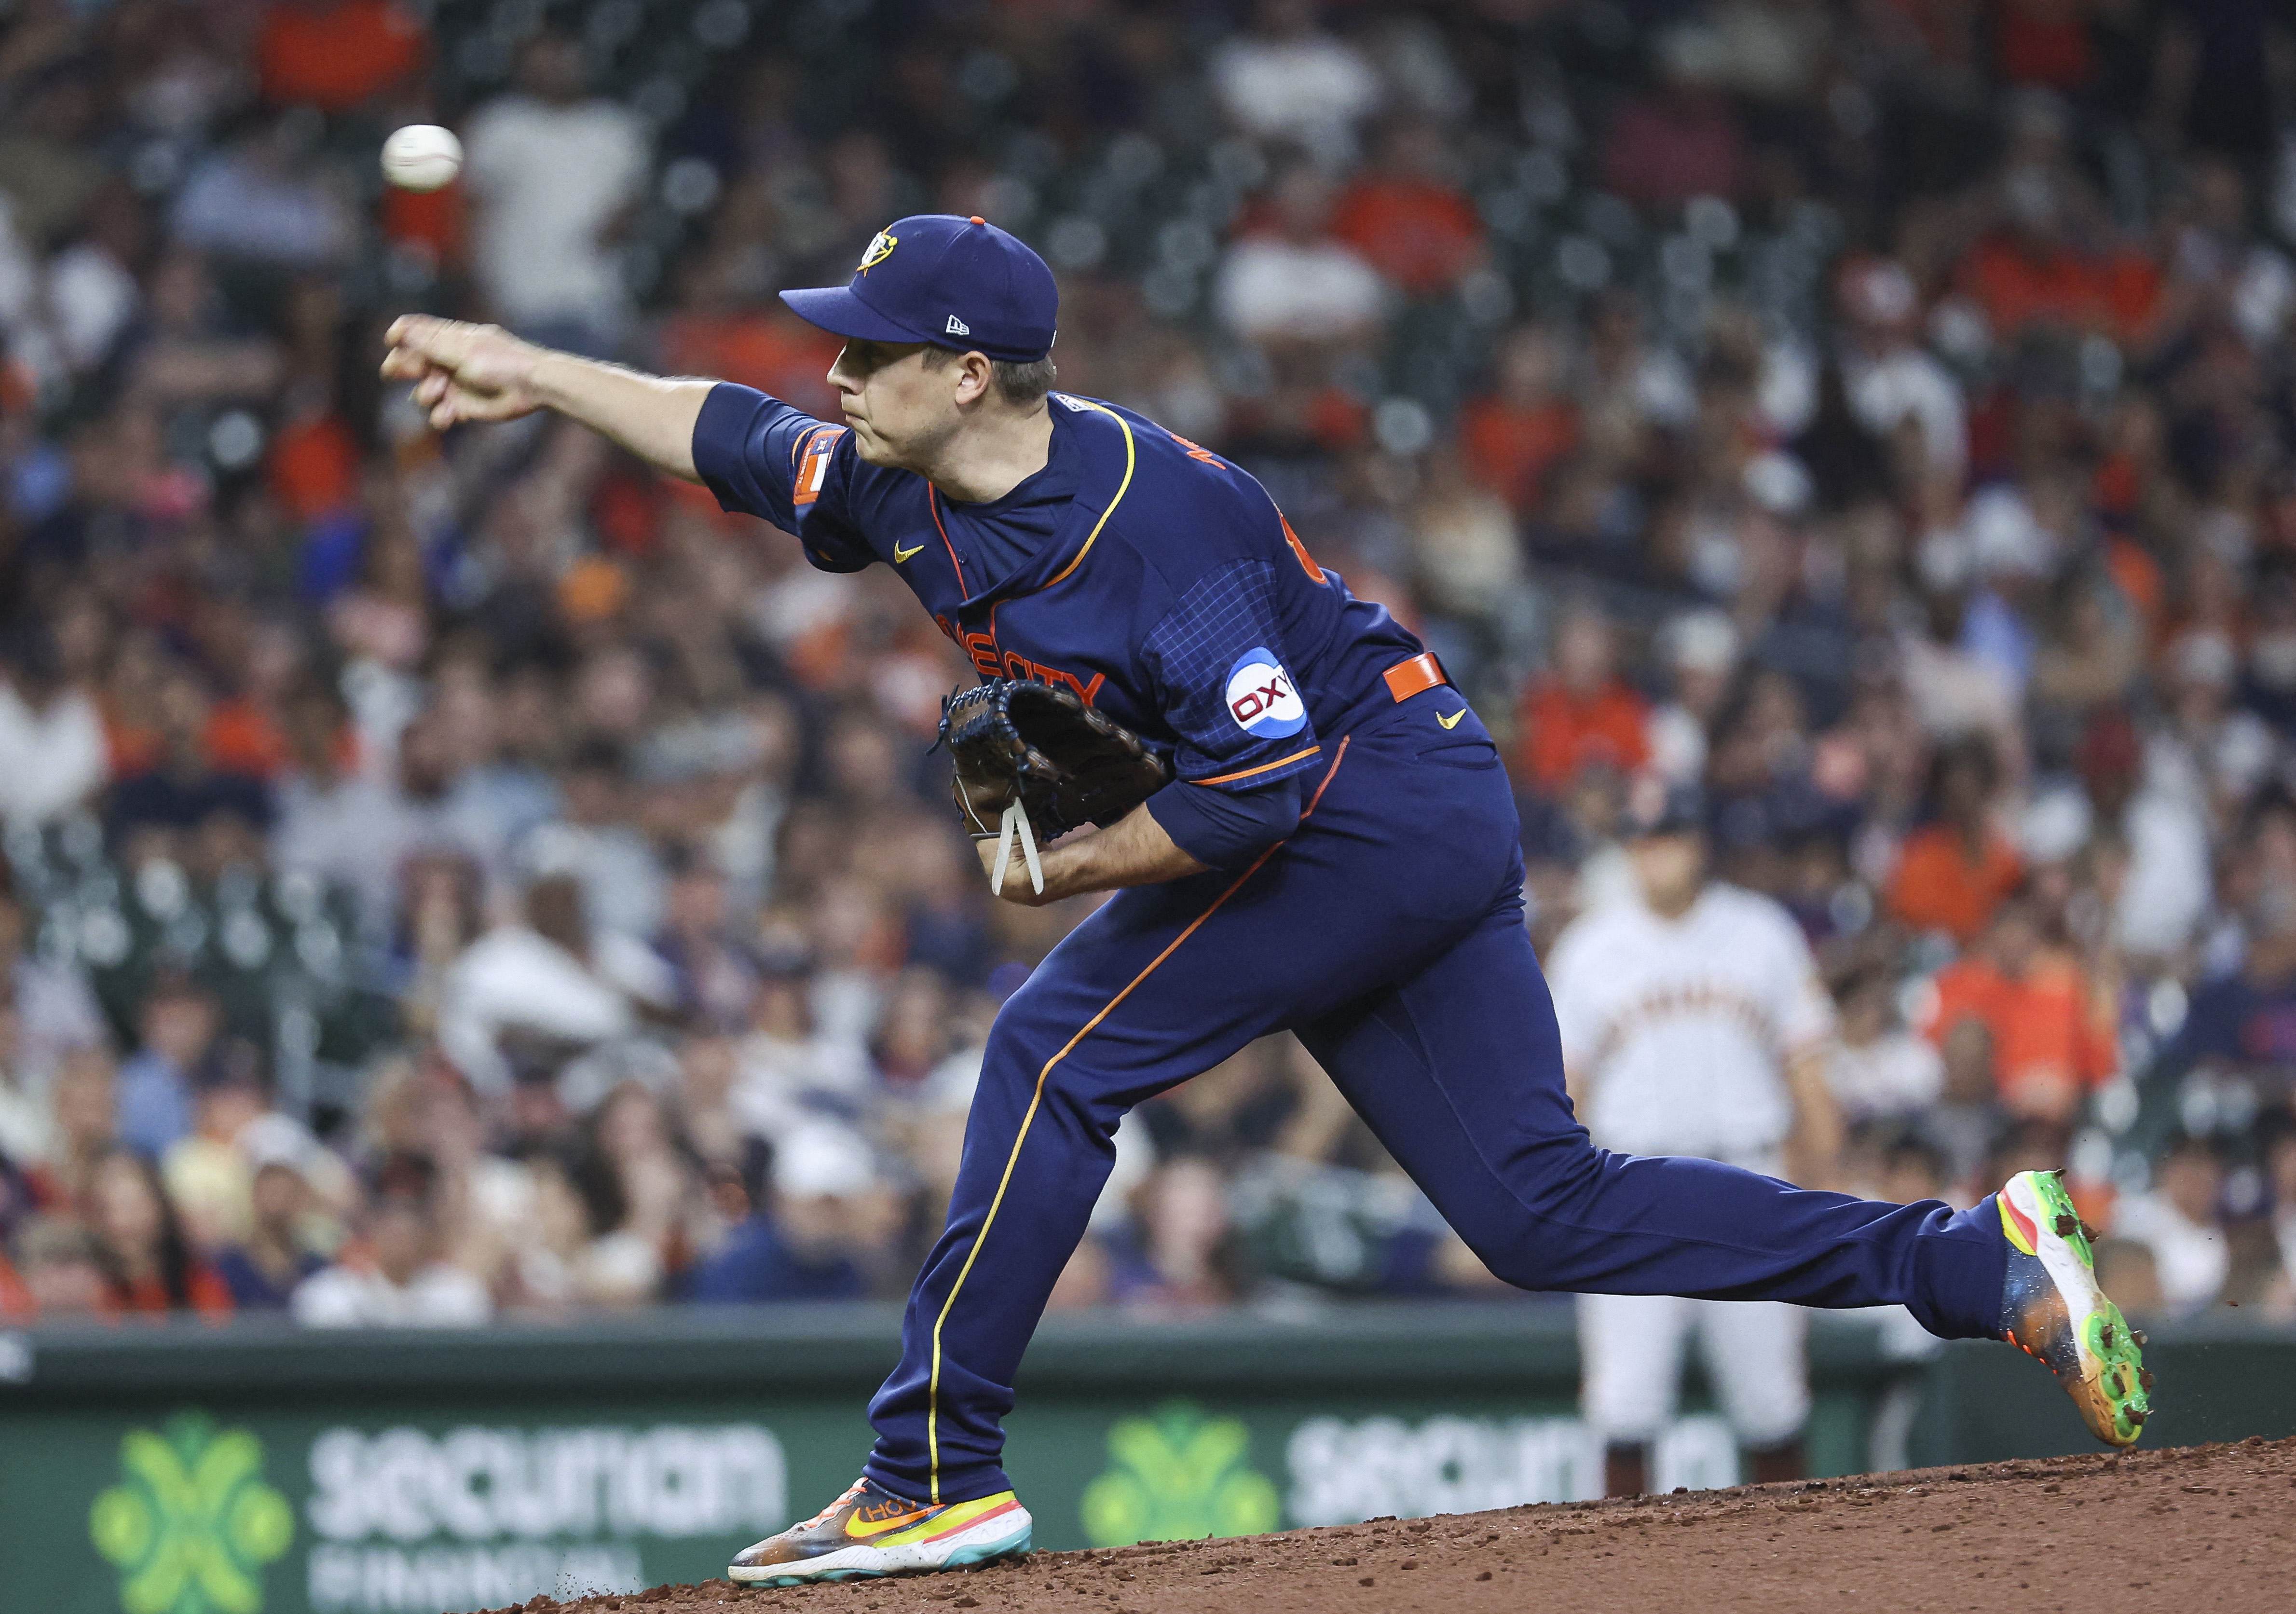 Luis Garcia exits early, but Astros still handle Giants